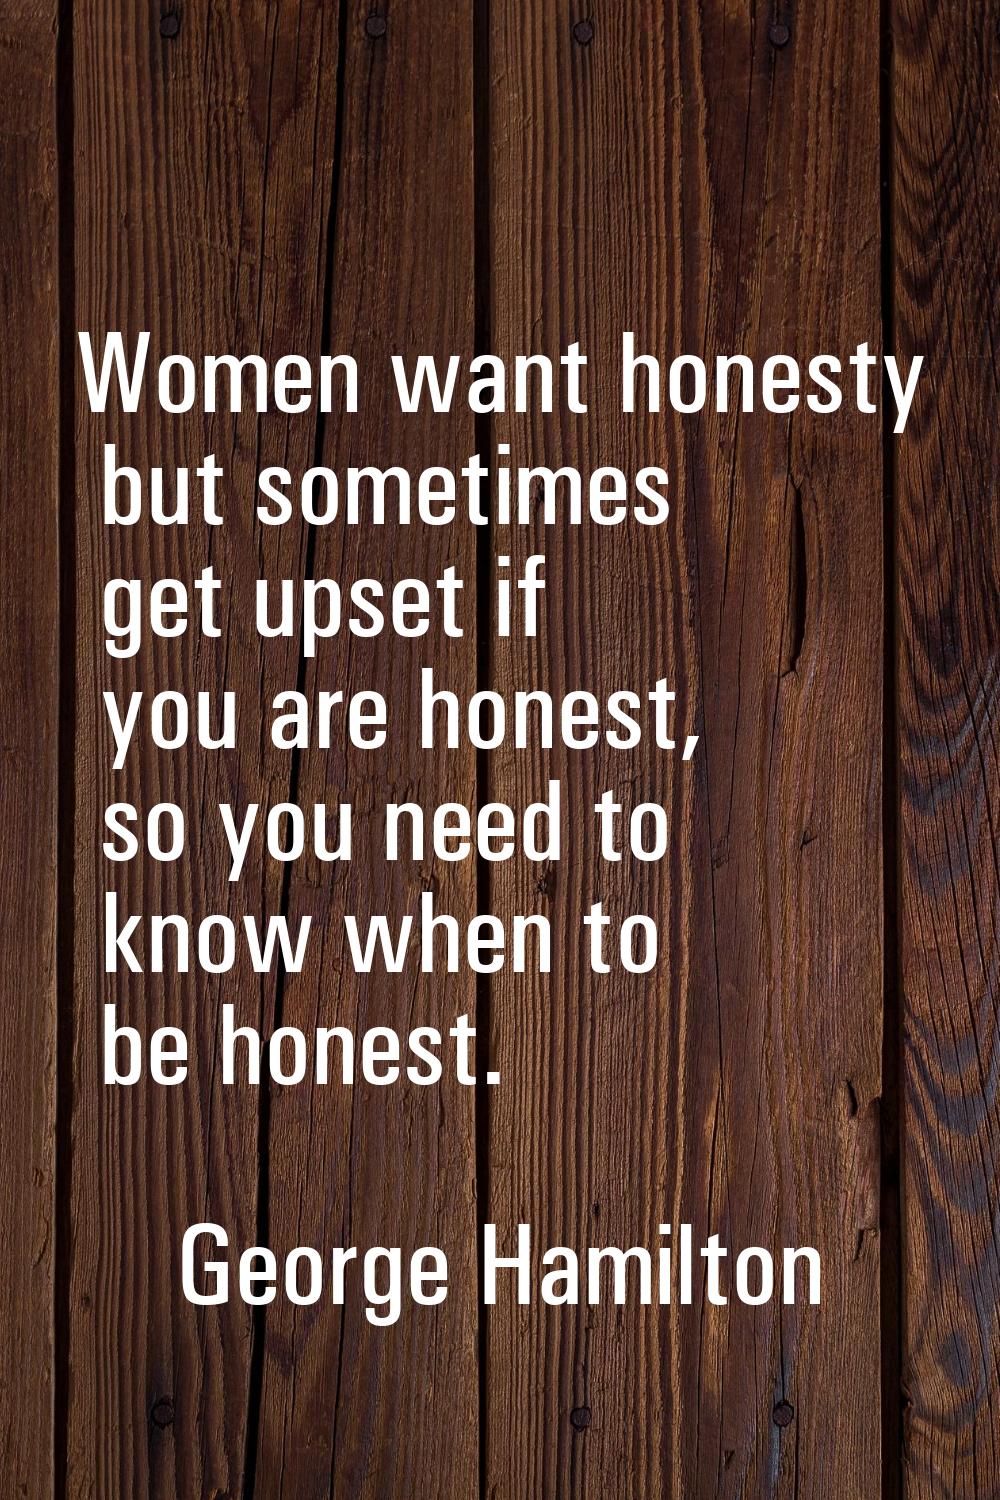 Women want honesty but sometimes get upset if you are honest, so you need to know when to be honest